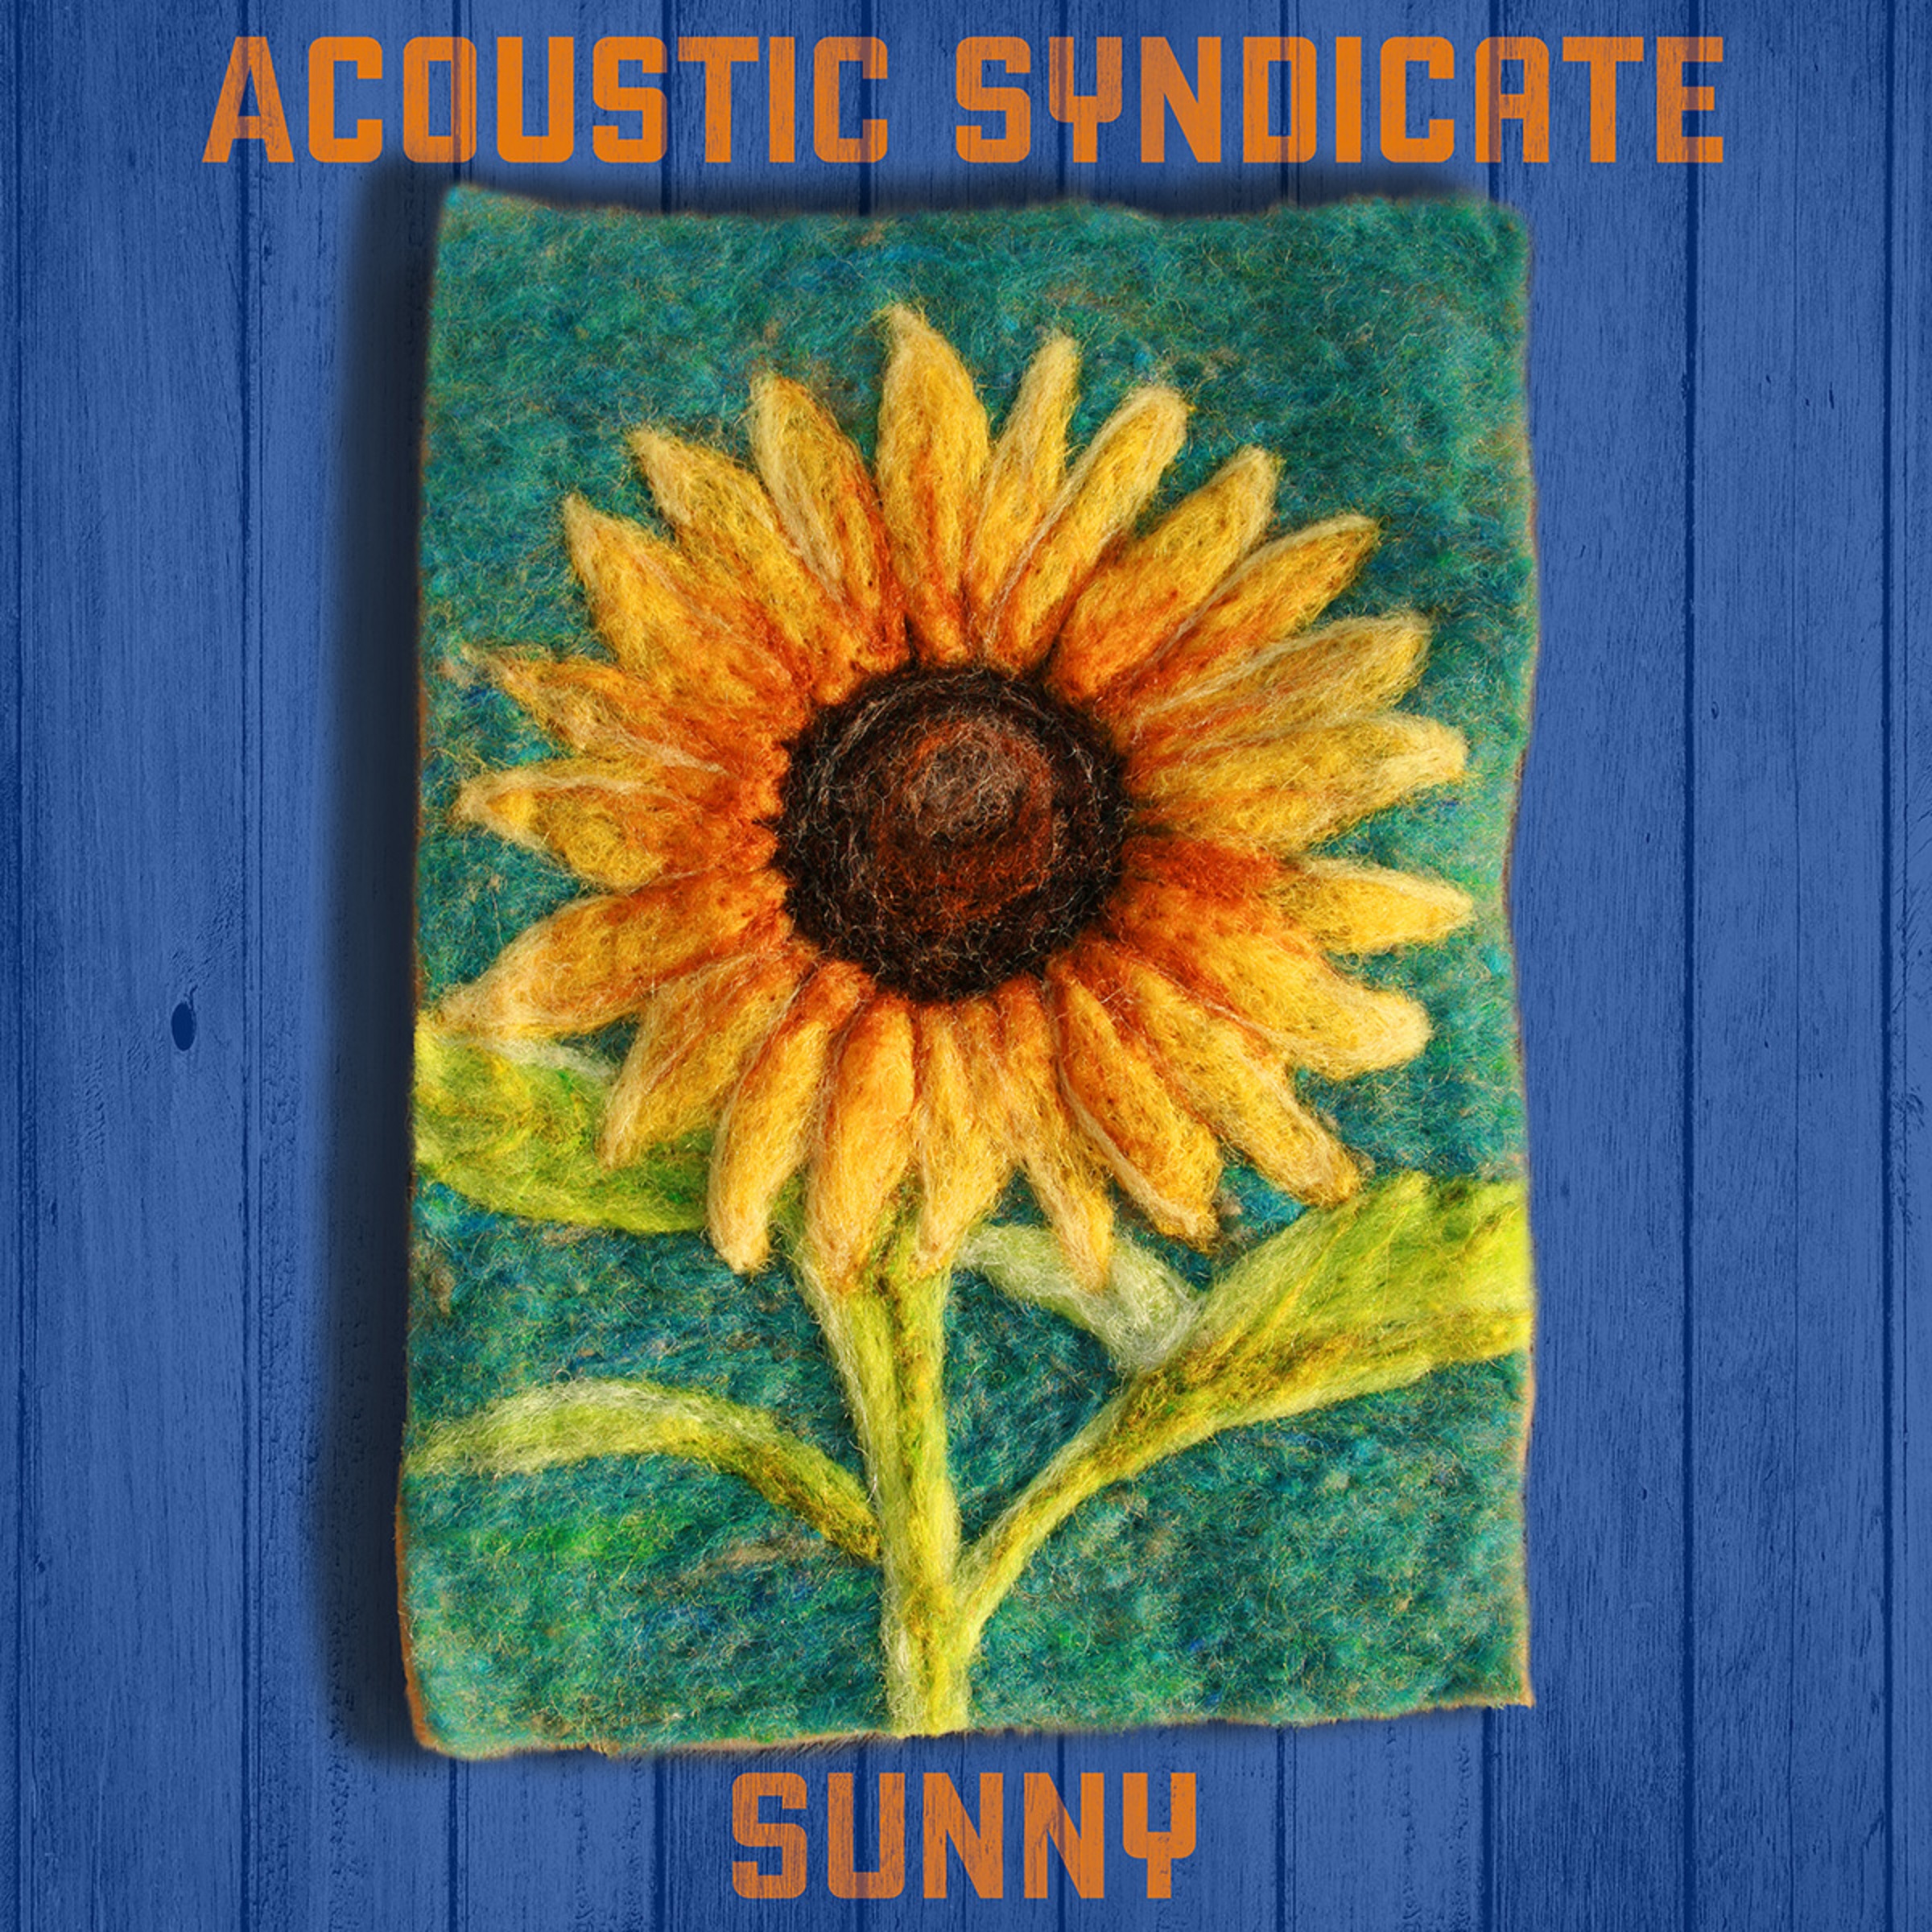 Acoustic Syndicate releases first recording in 7 years